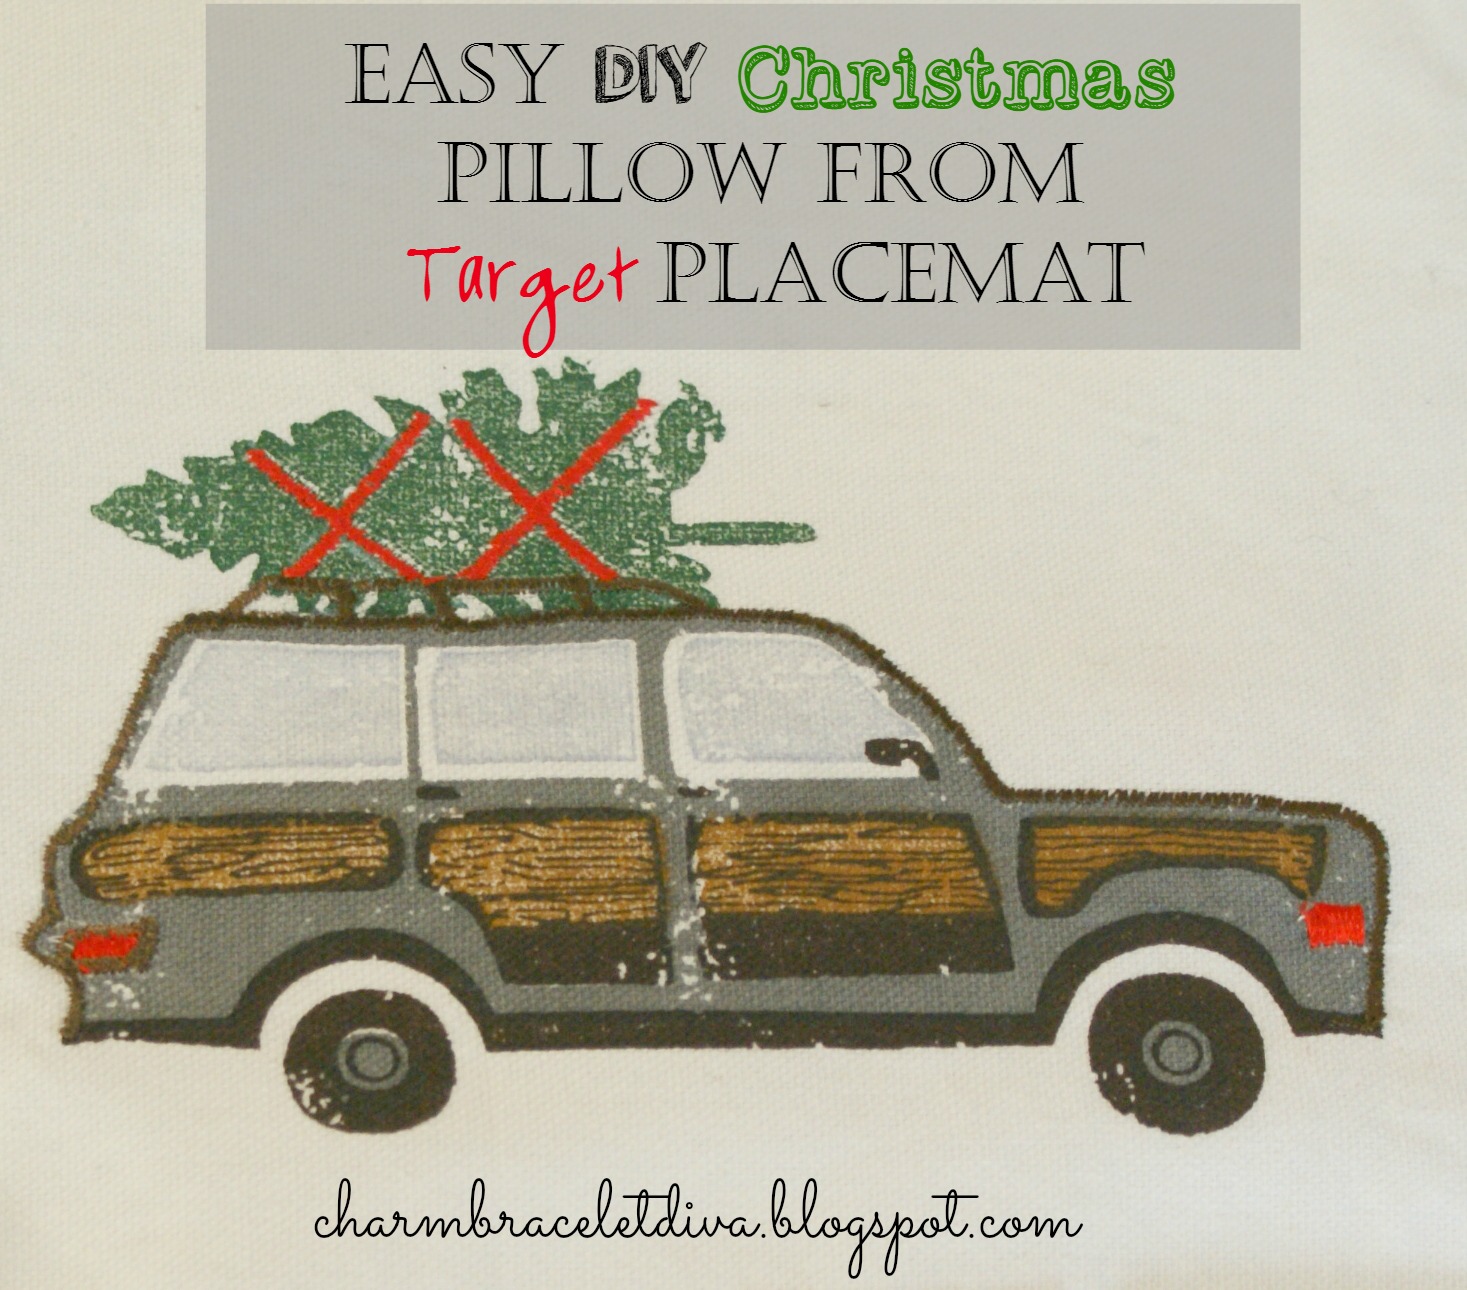 Our Hopeful Home: Easy DIY Christmas Pillow From Target Placemat